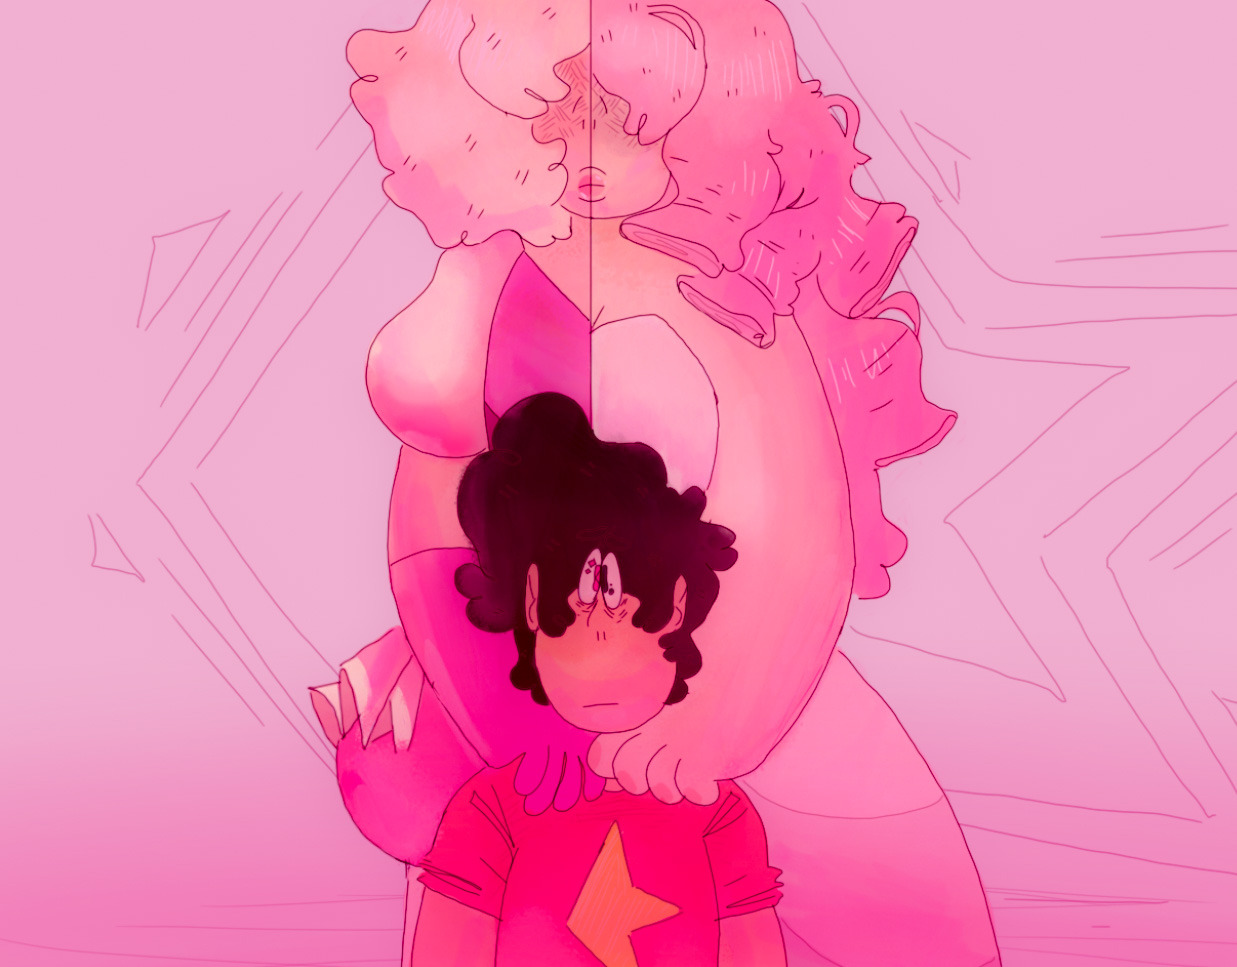 hey becky glucose! i hate you P.S. yes i know steven has no neck just please spare m P.S.S. also he has eyebrows and hes worried but i colored the lines weird so you cant see it im so sorry Reblogs >...